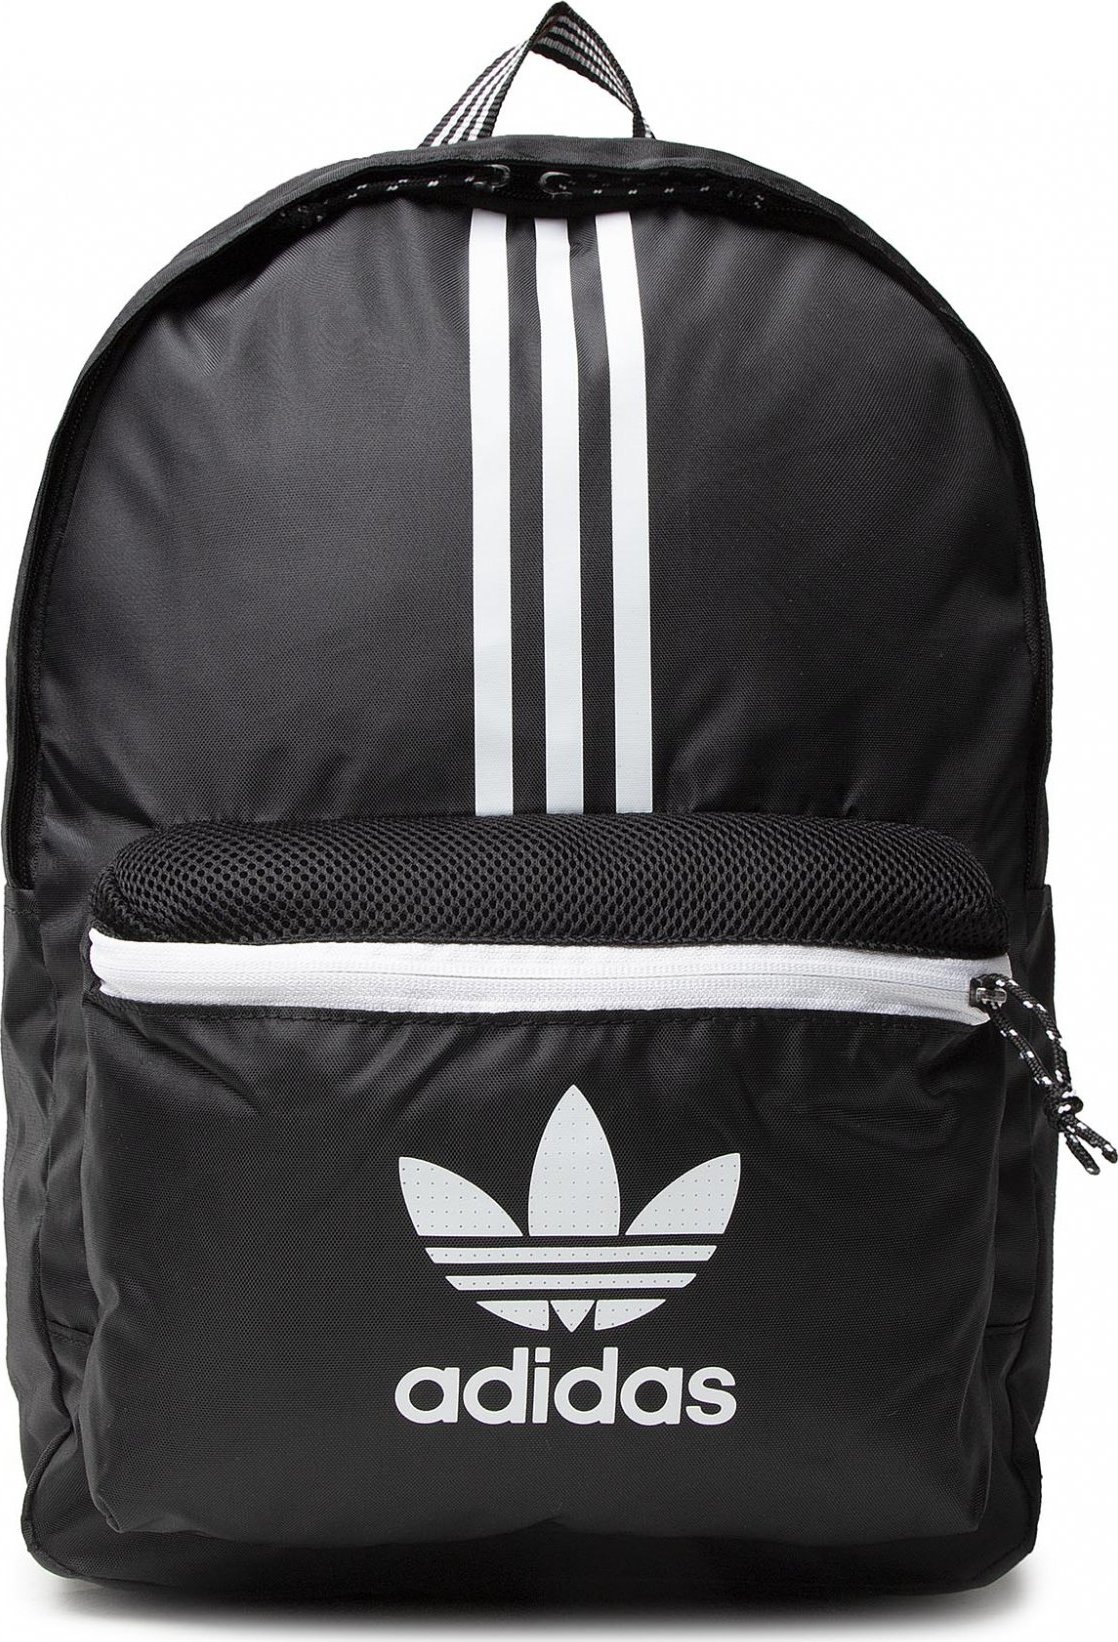 adidas Ac Backpack H35532